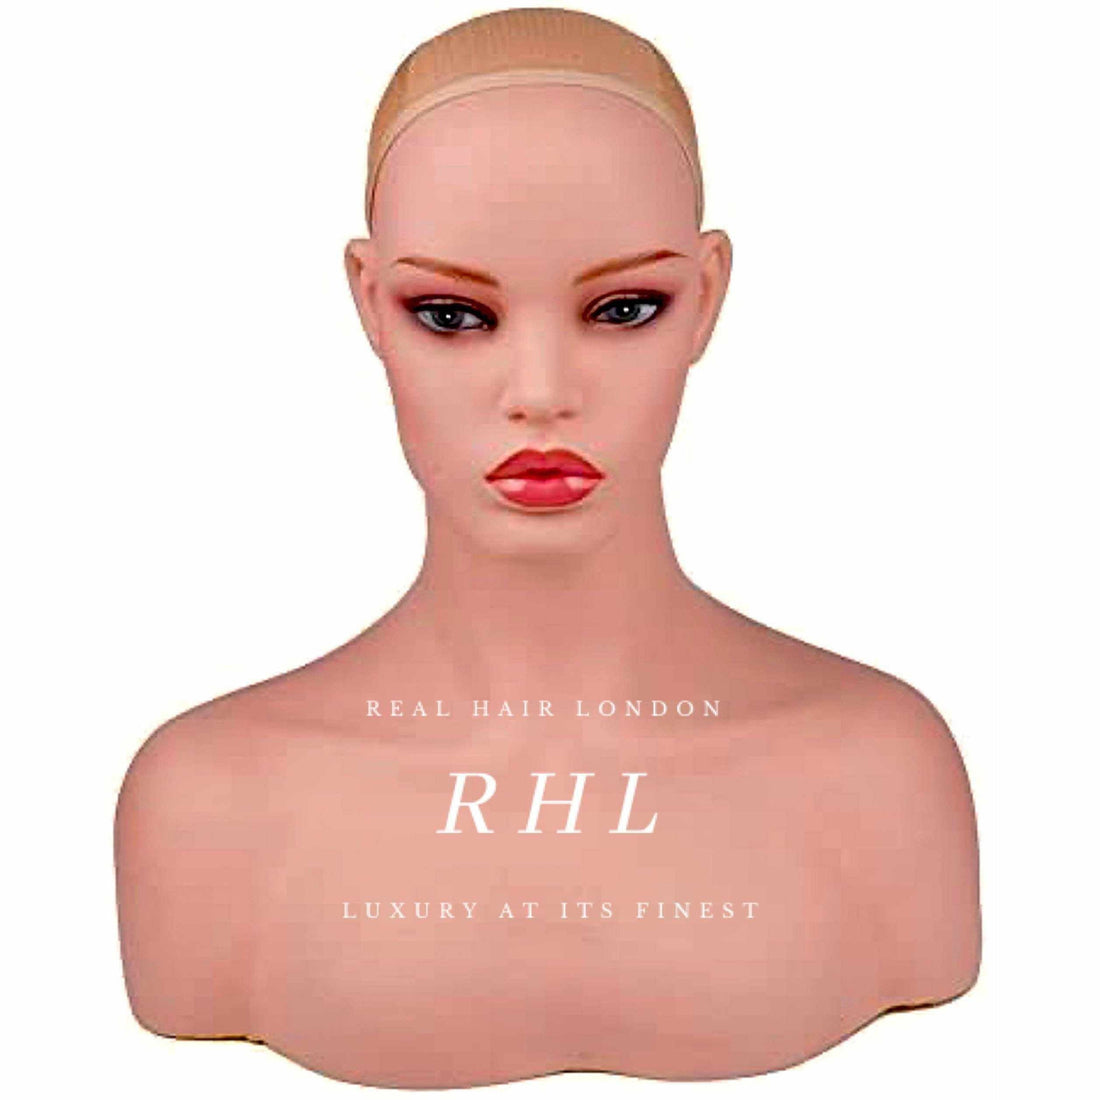 The Luxury World of Real Hair London Dolls: Professional Female Mannequin Head and Bust